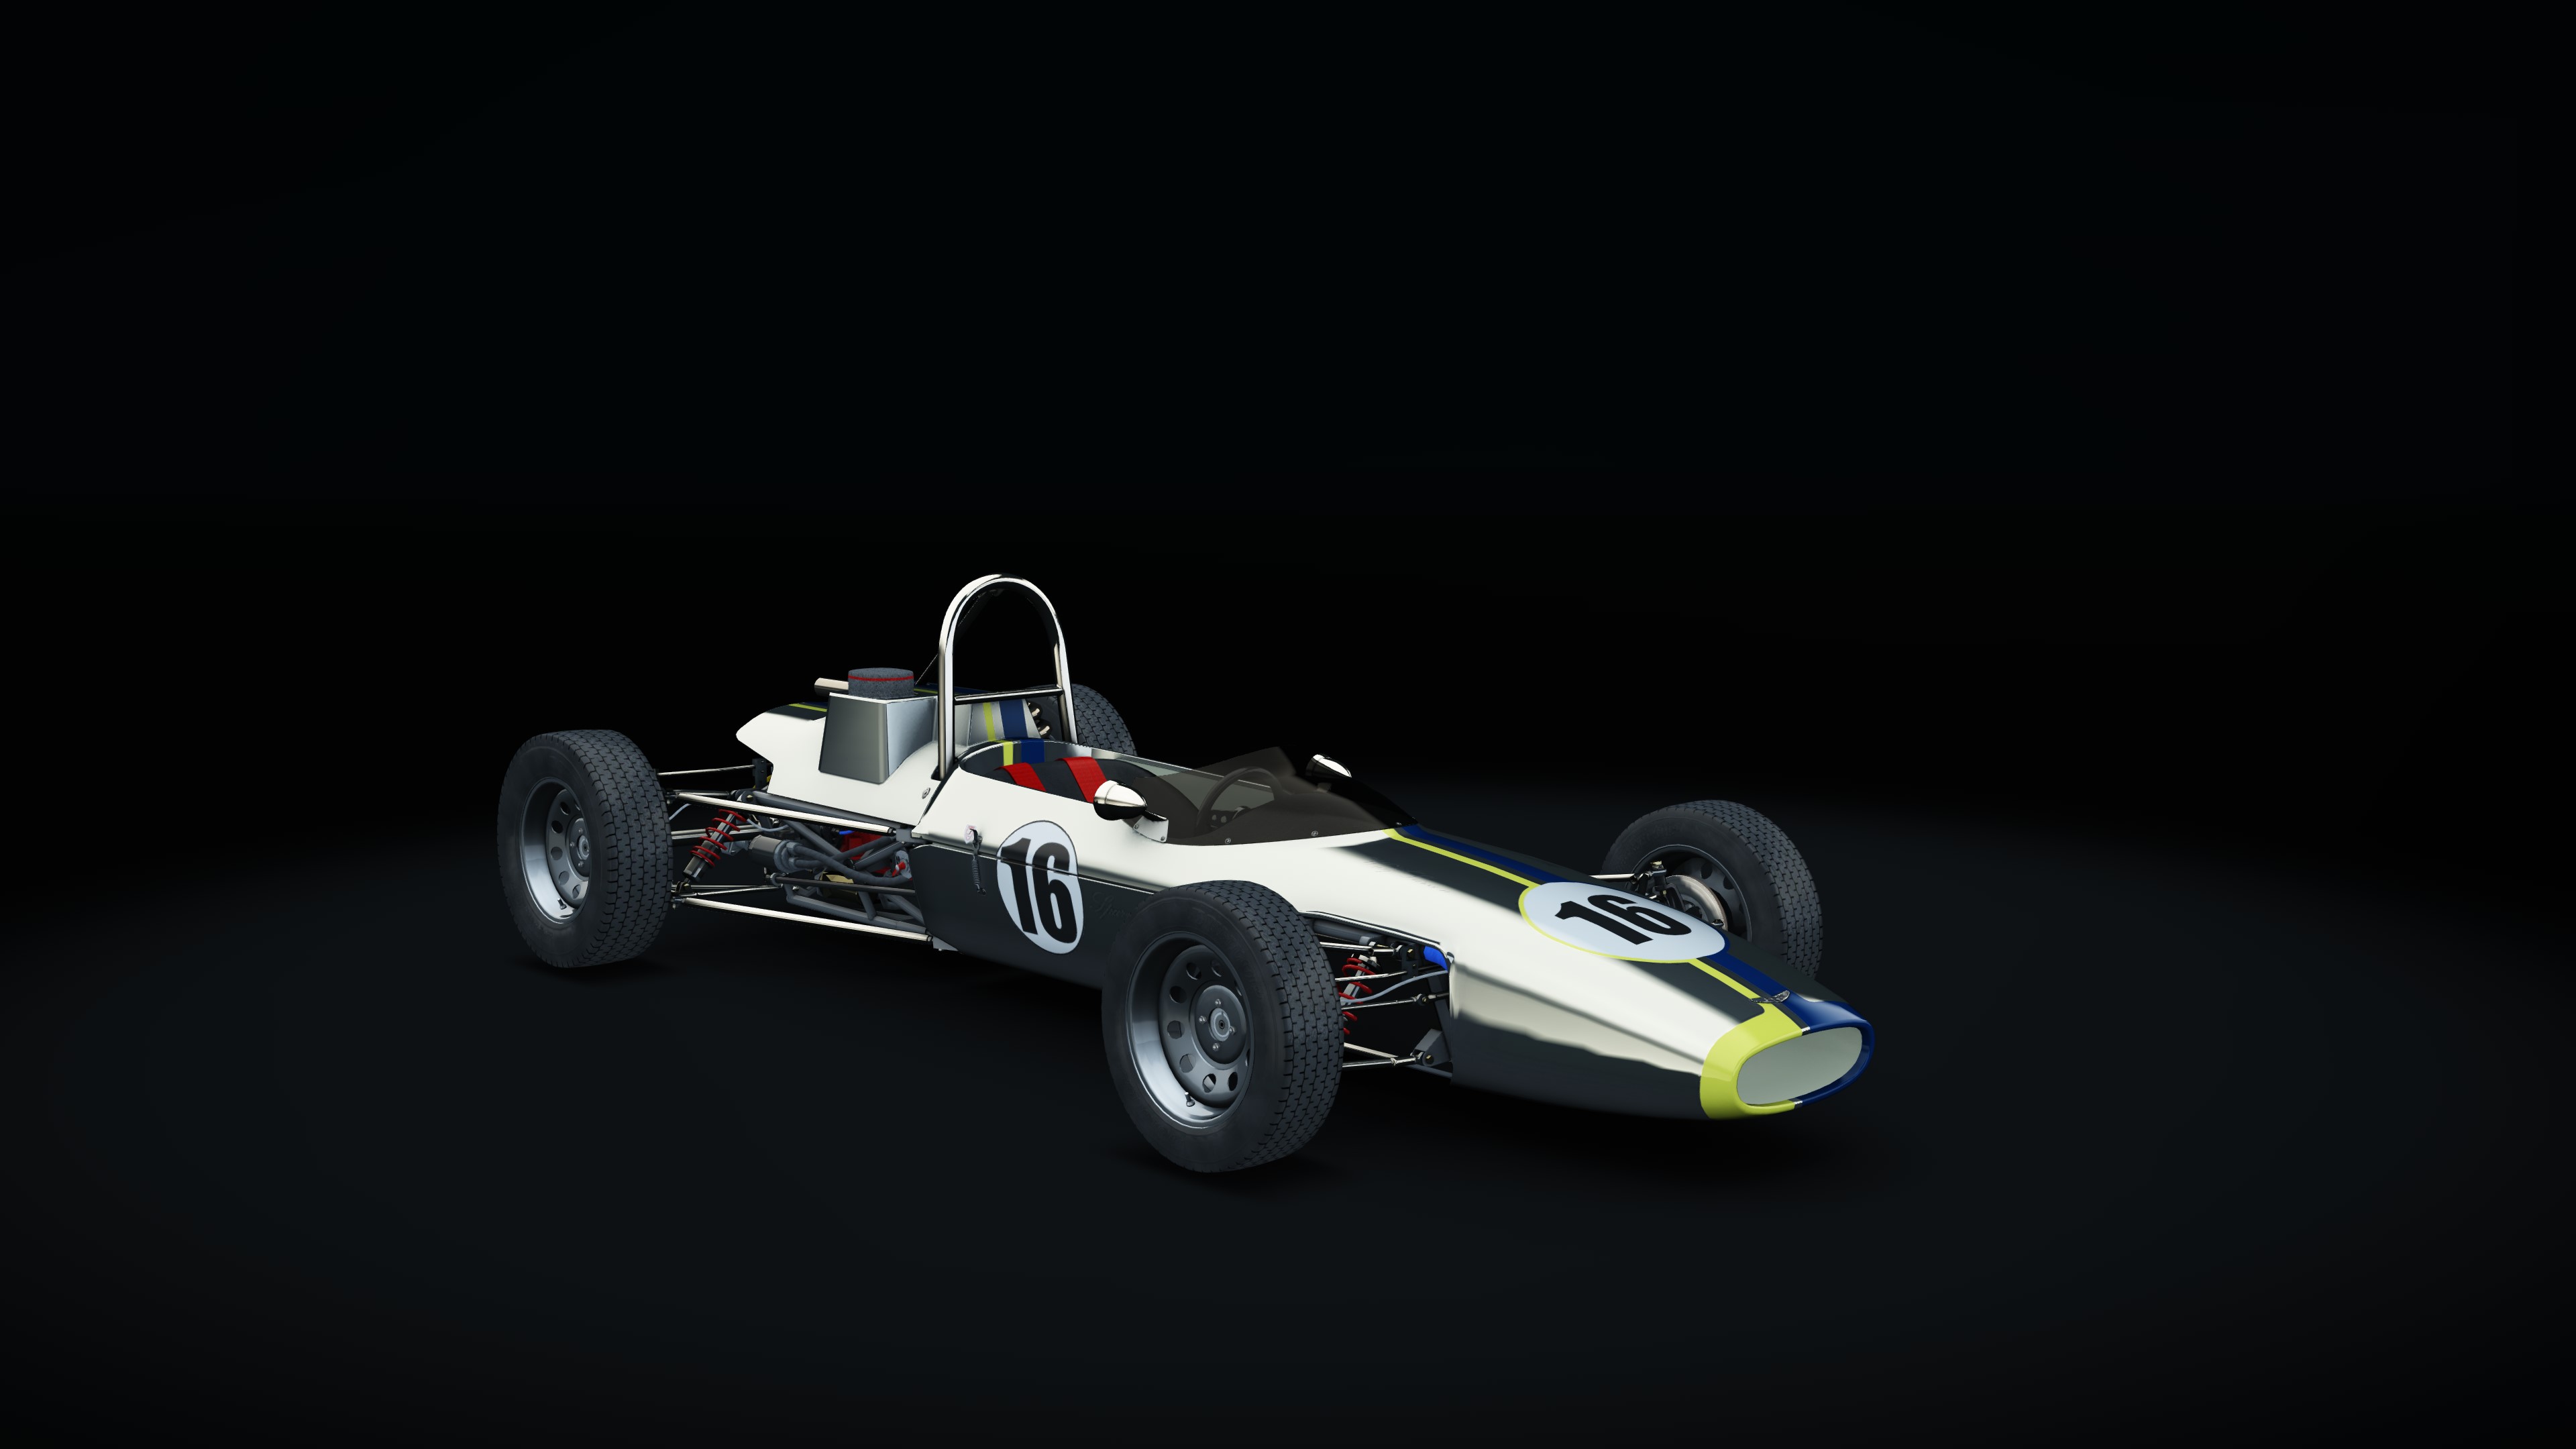 Russell-Alexis Mk. 14 Formula Ford, skin 16WLarsson